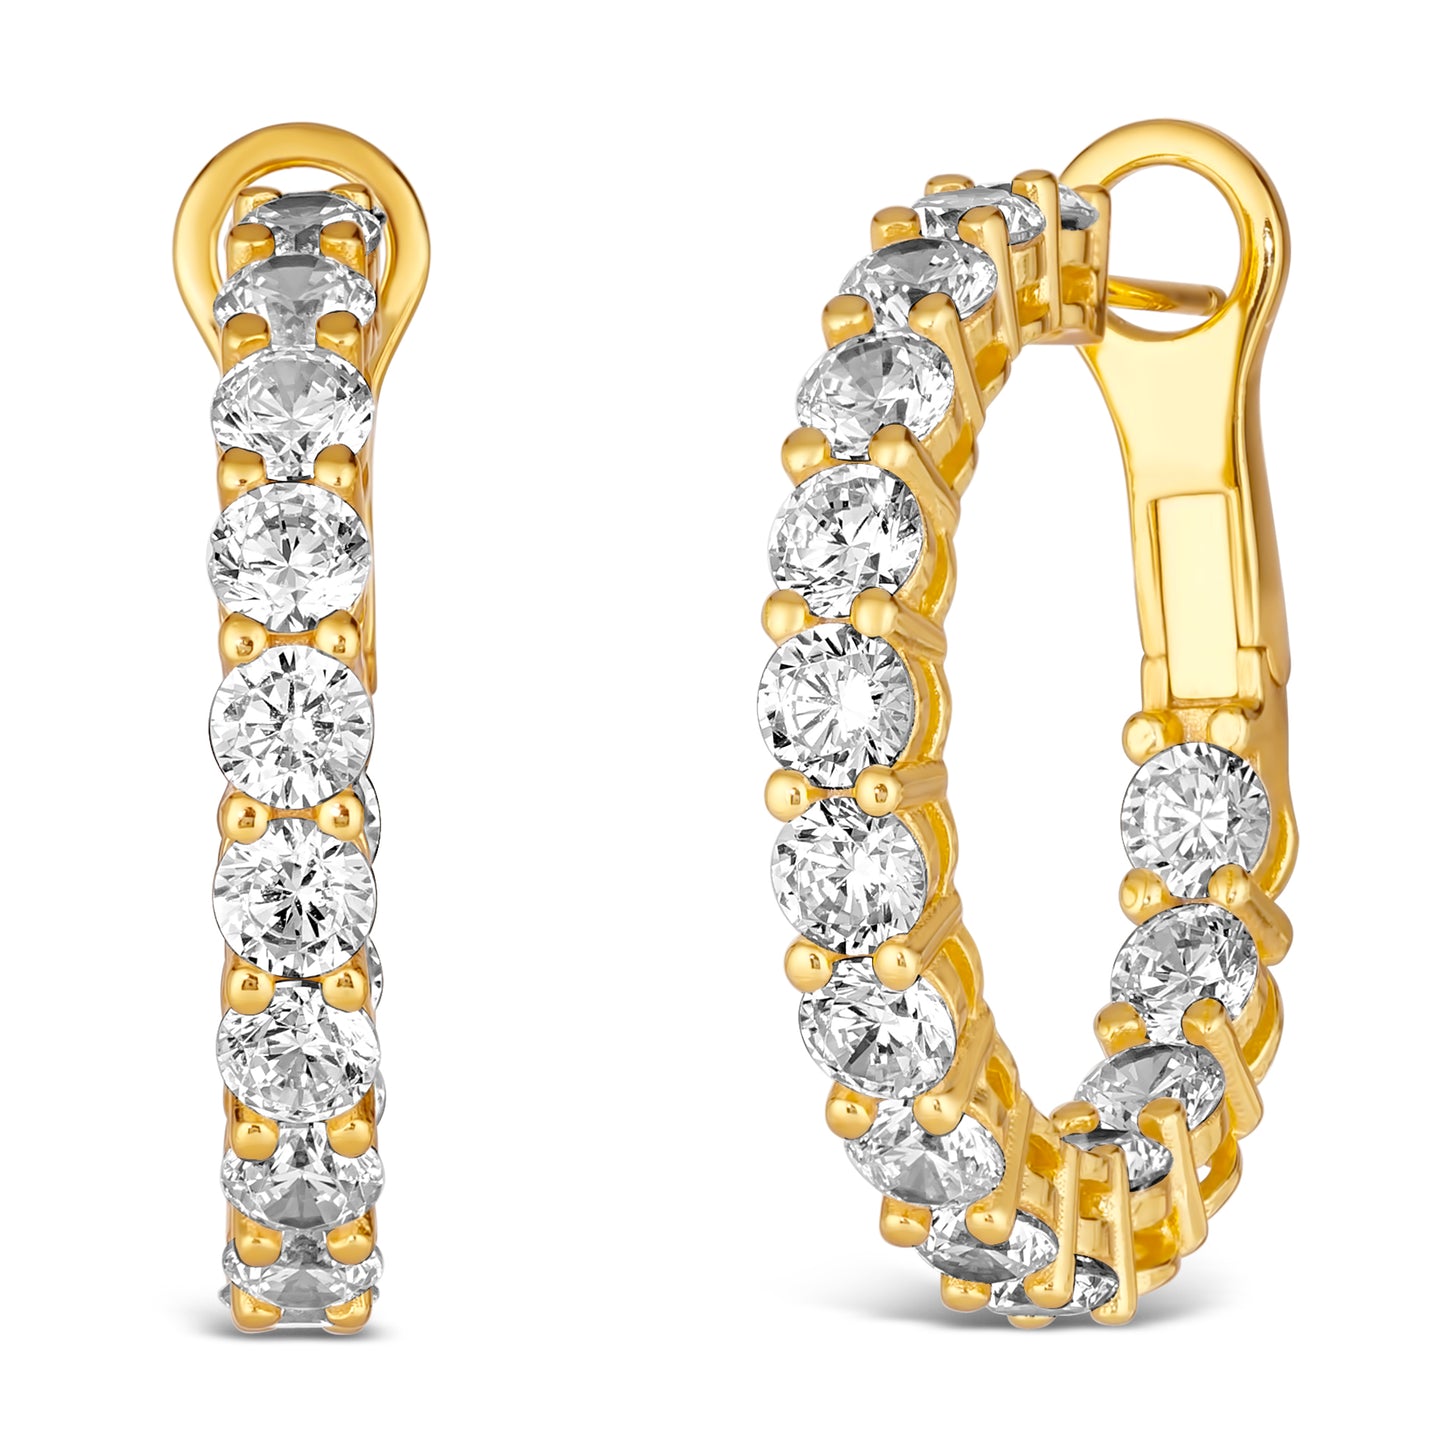 3.75 Carat Inside Out Shared Prong Hoops